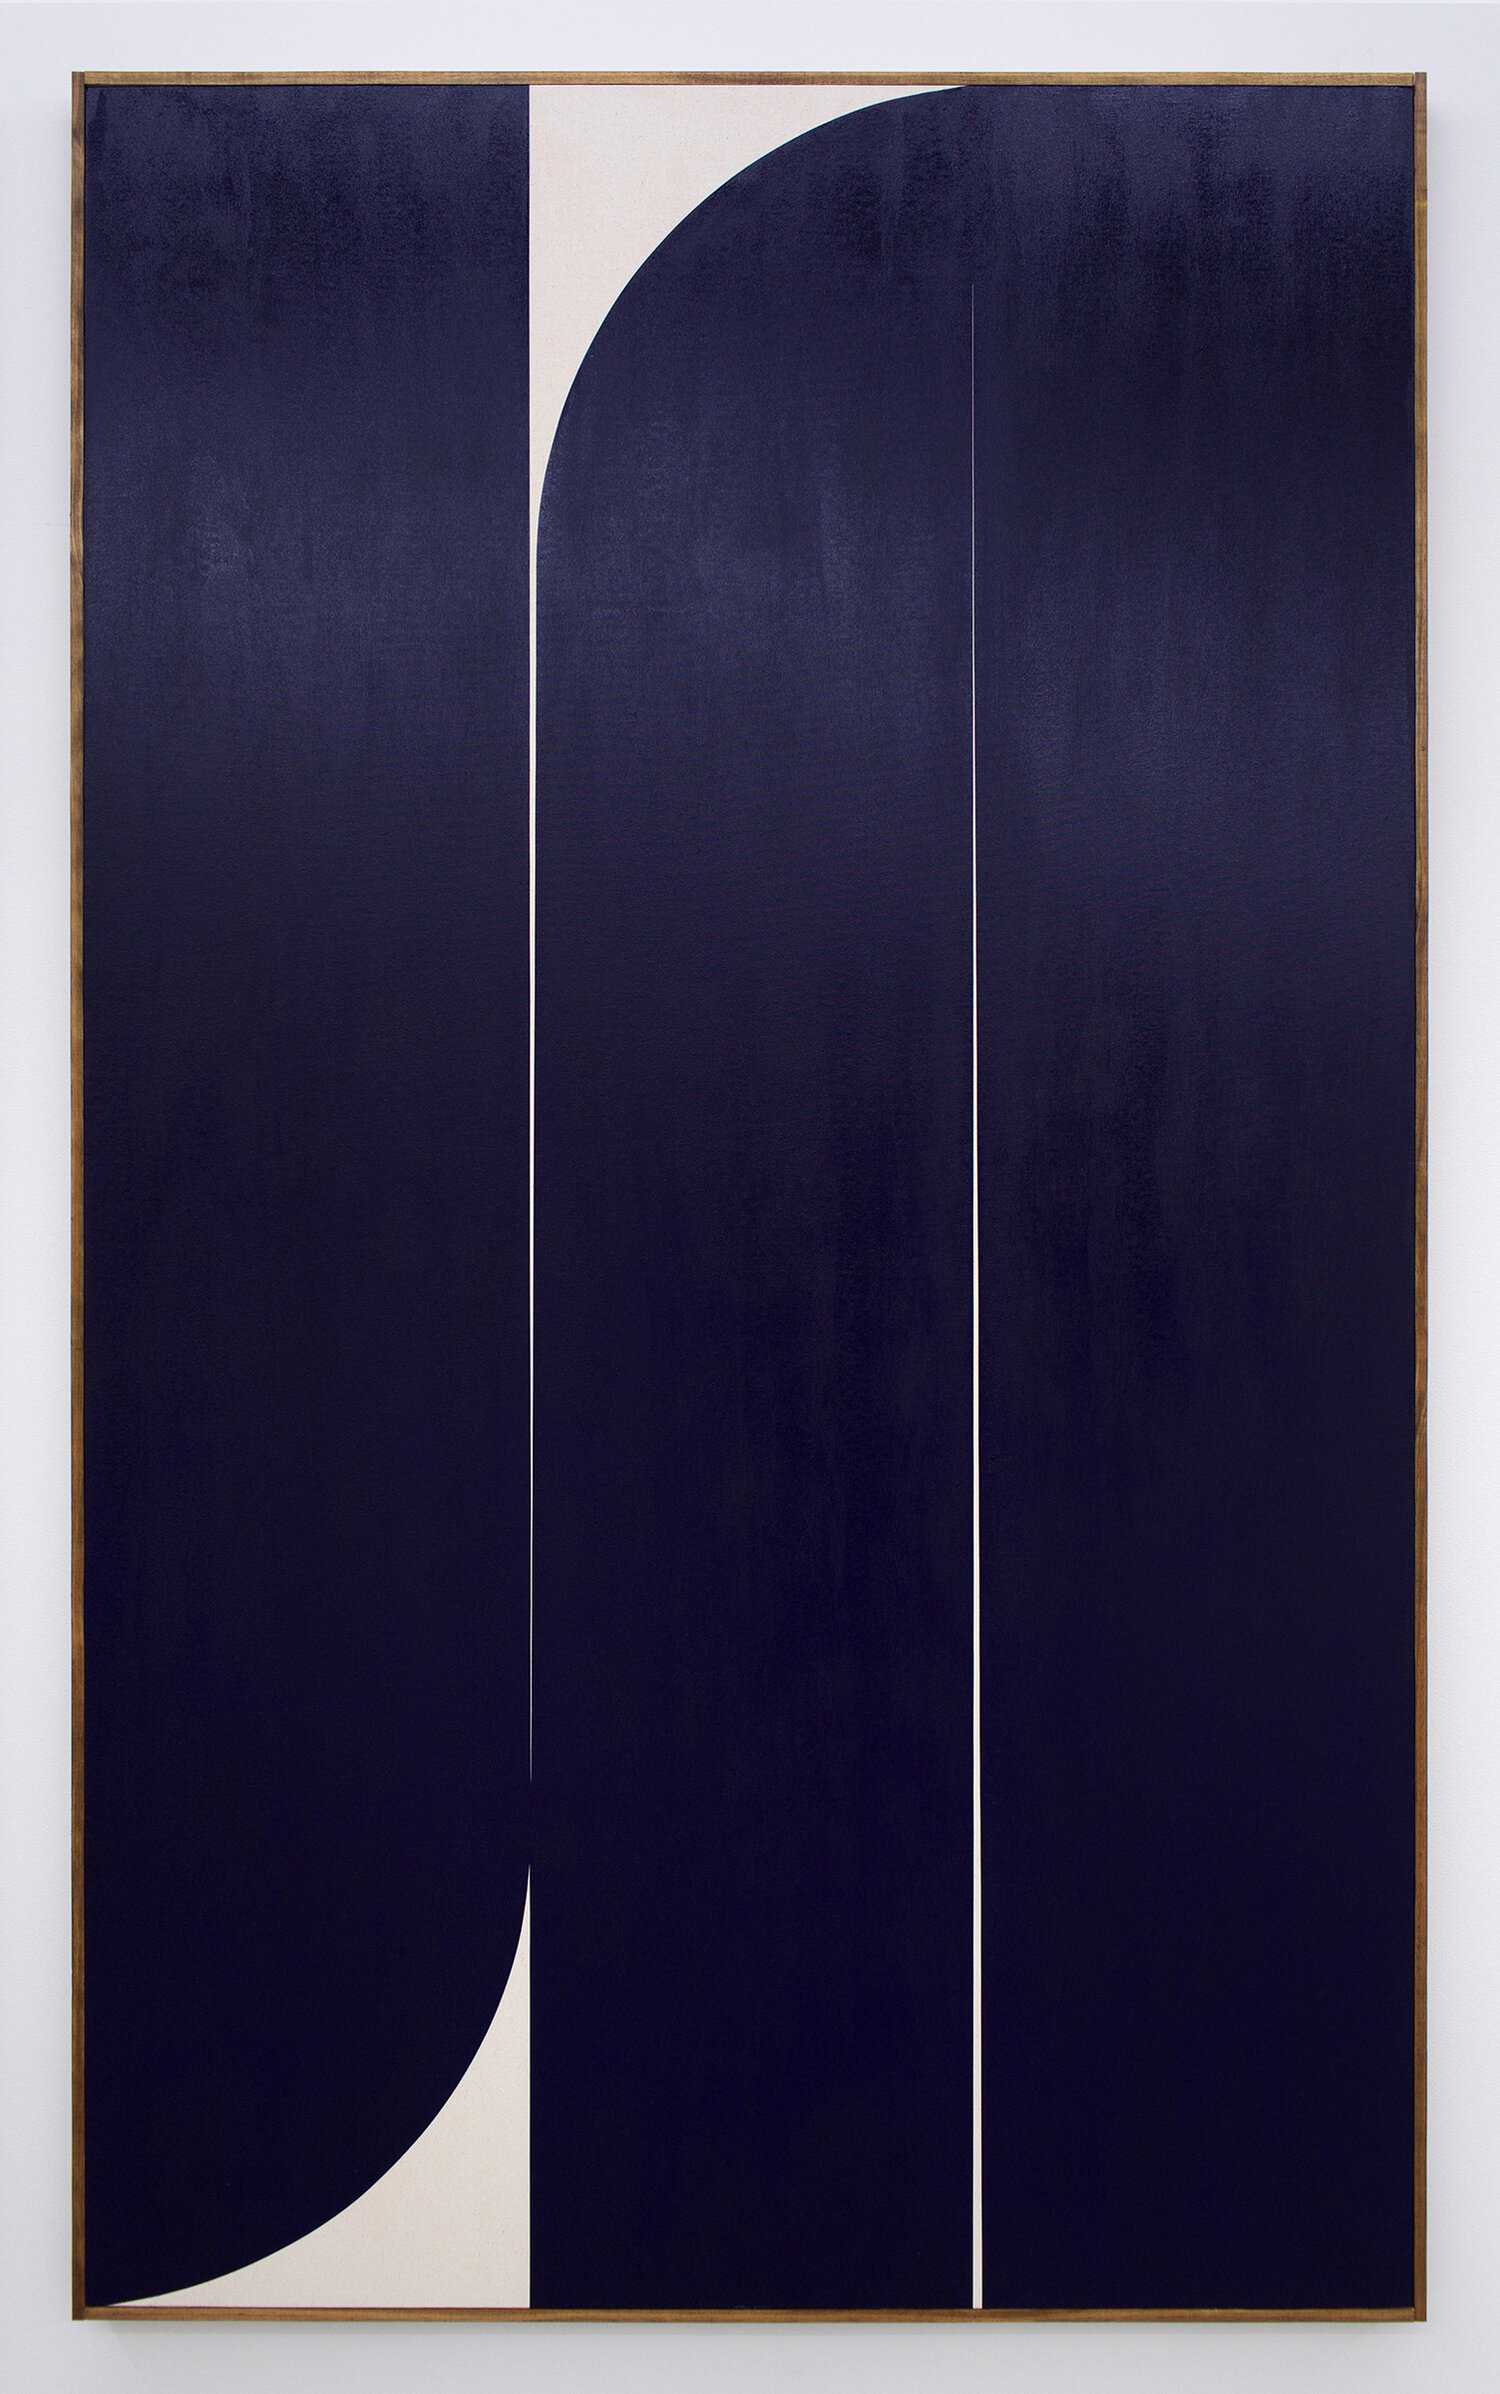  JOHNNY ABRAHAMS Untitled (Blue 3), 2019 oil on canvas, 80” x 48” 